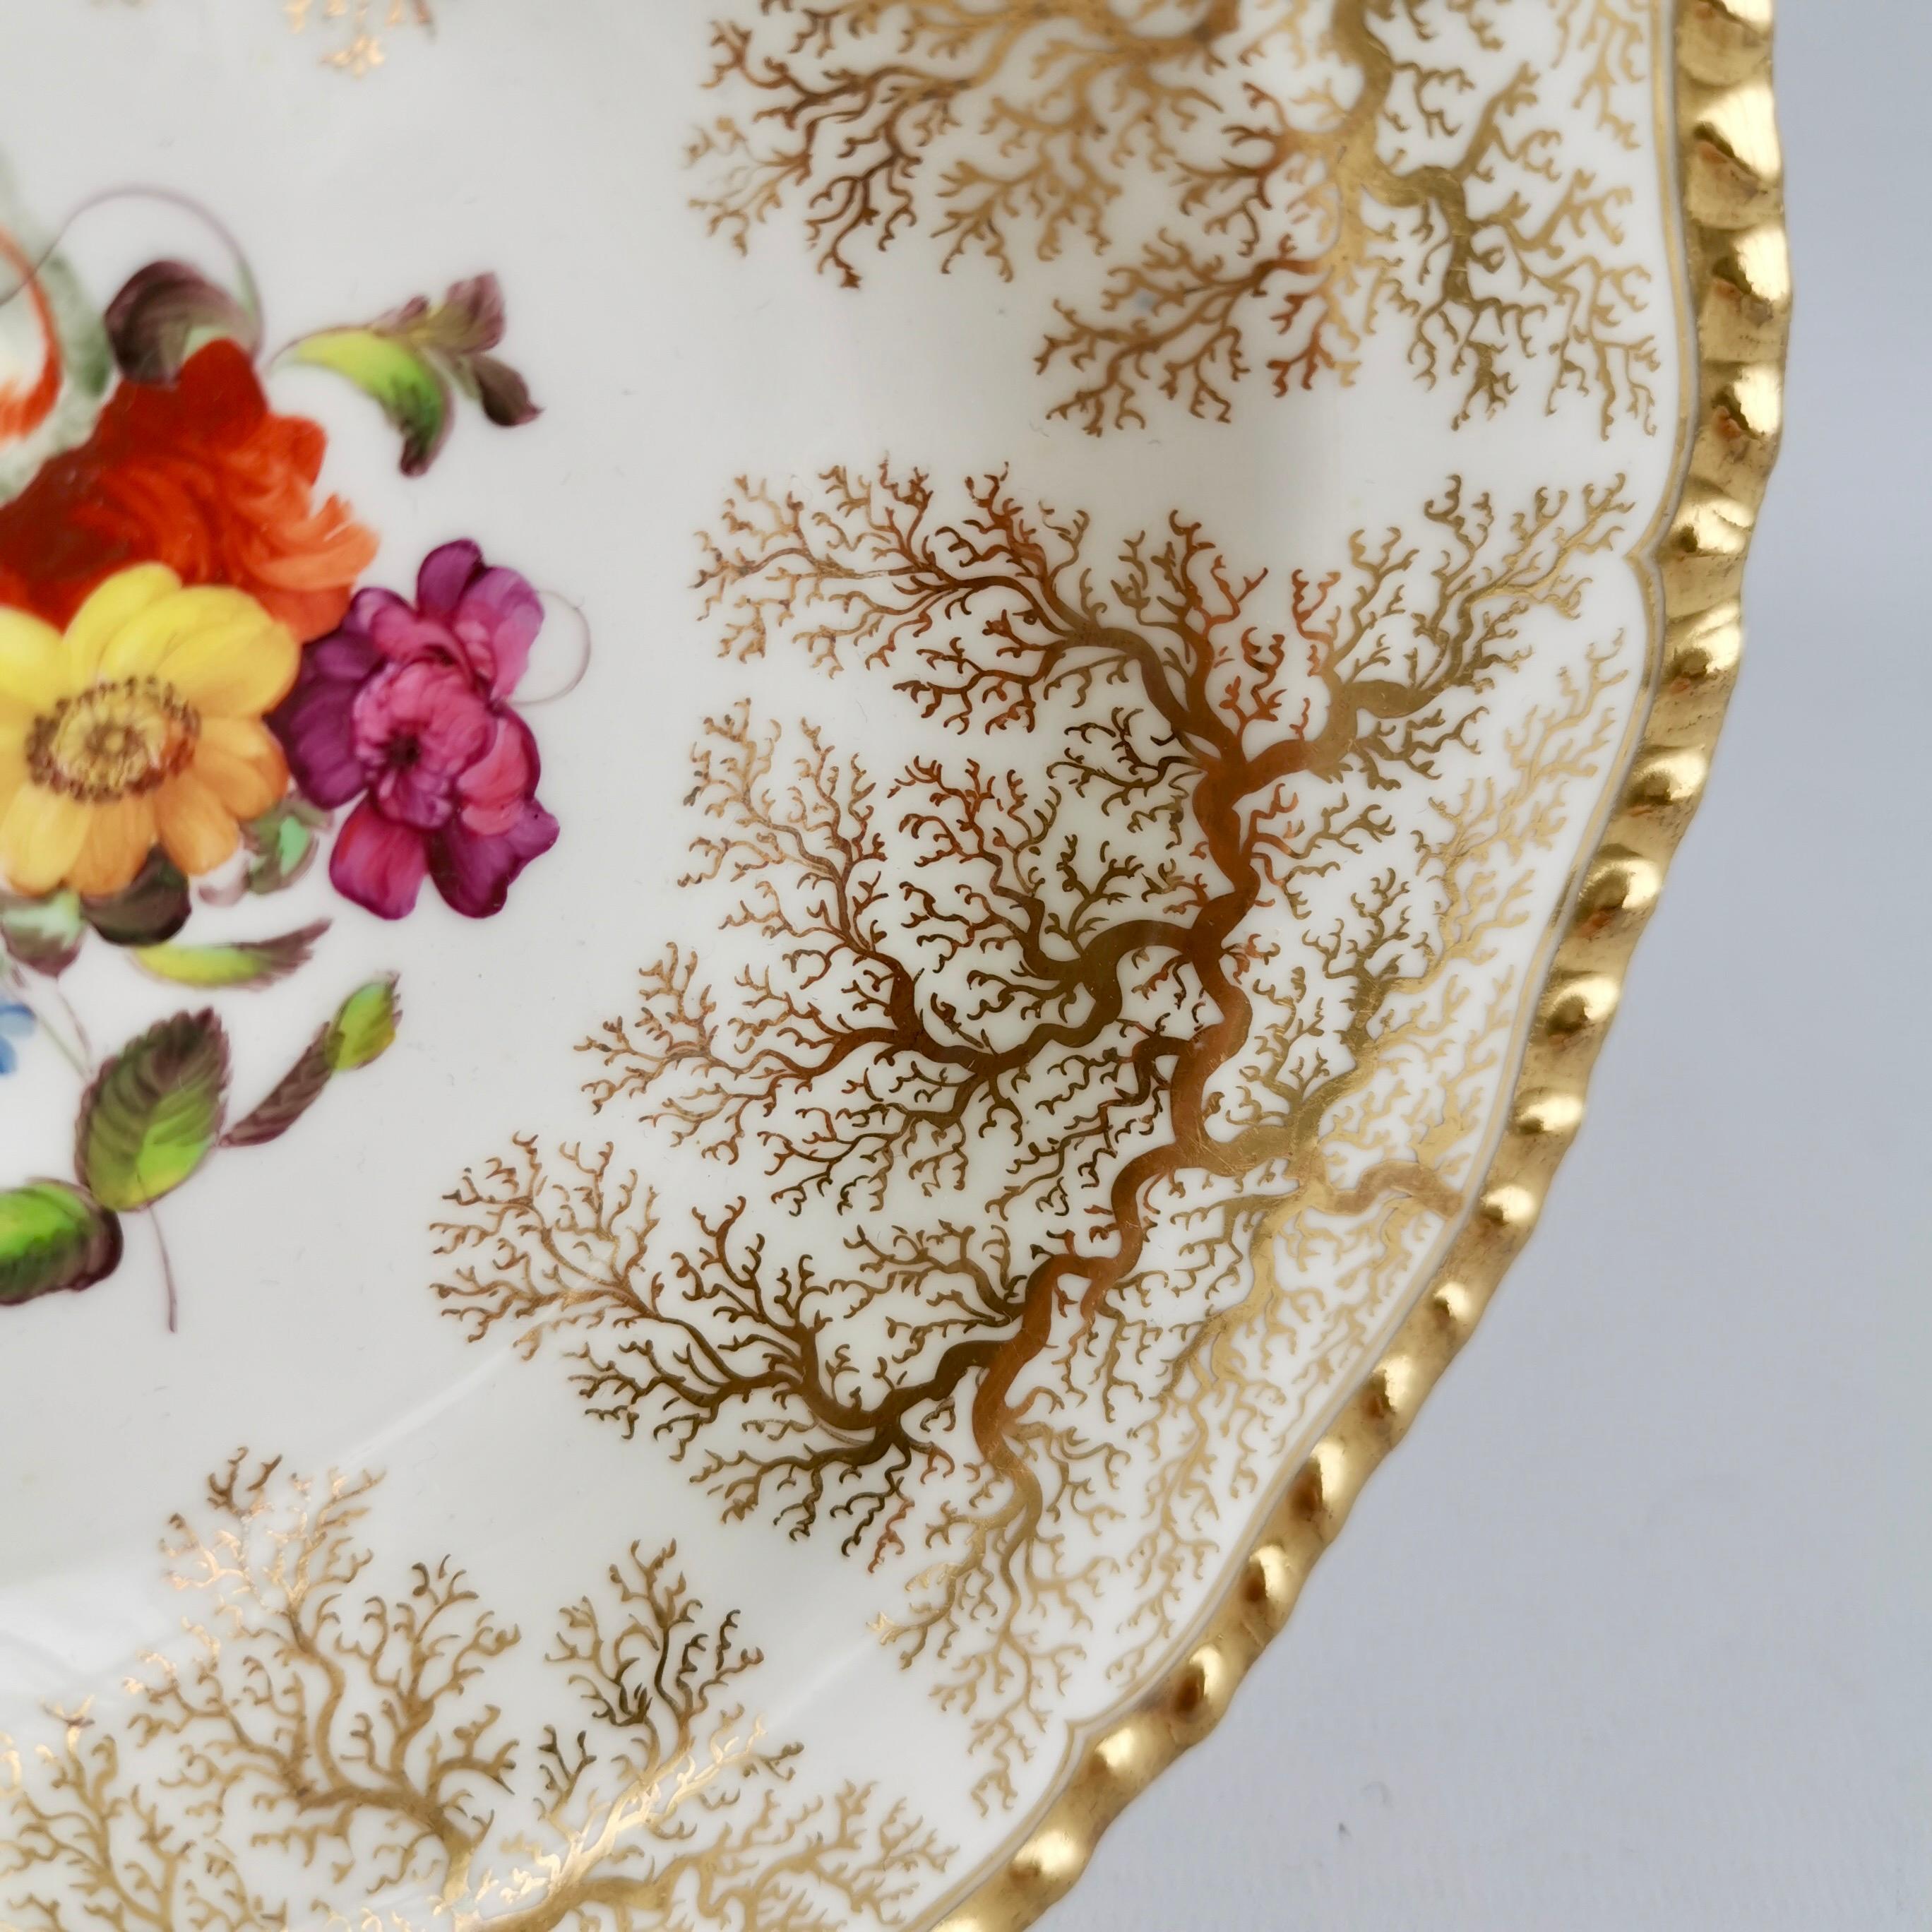 Hand-Painted Flight Barr and Barr Small Porcelain Bowl, Gilt Seaweed, Regency 1816-1820